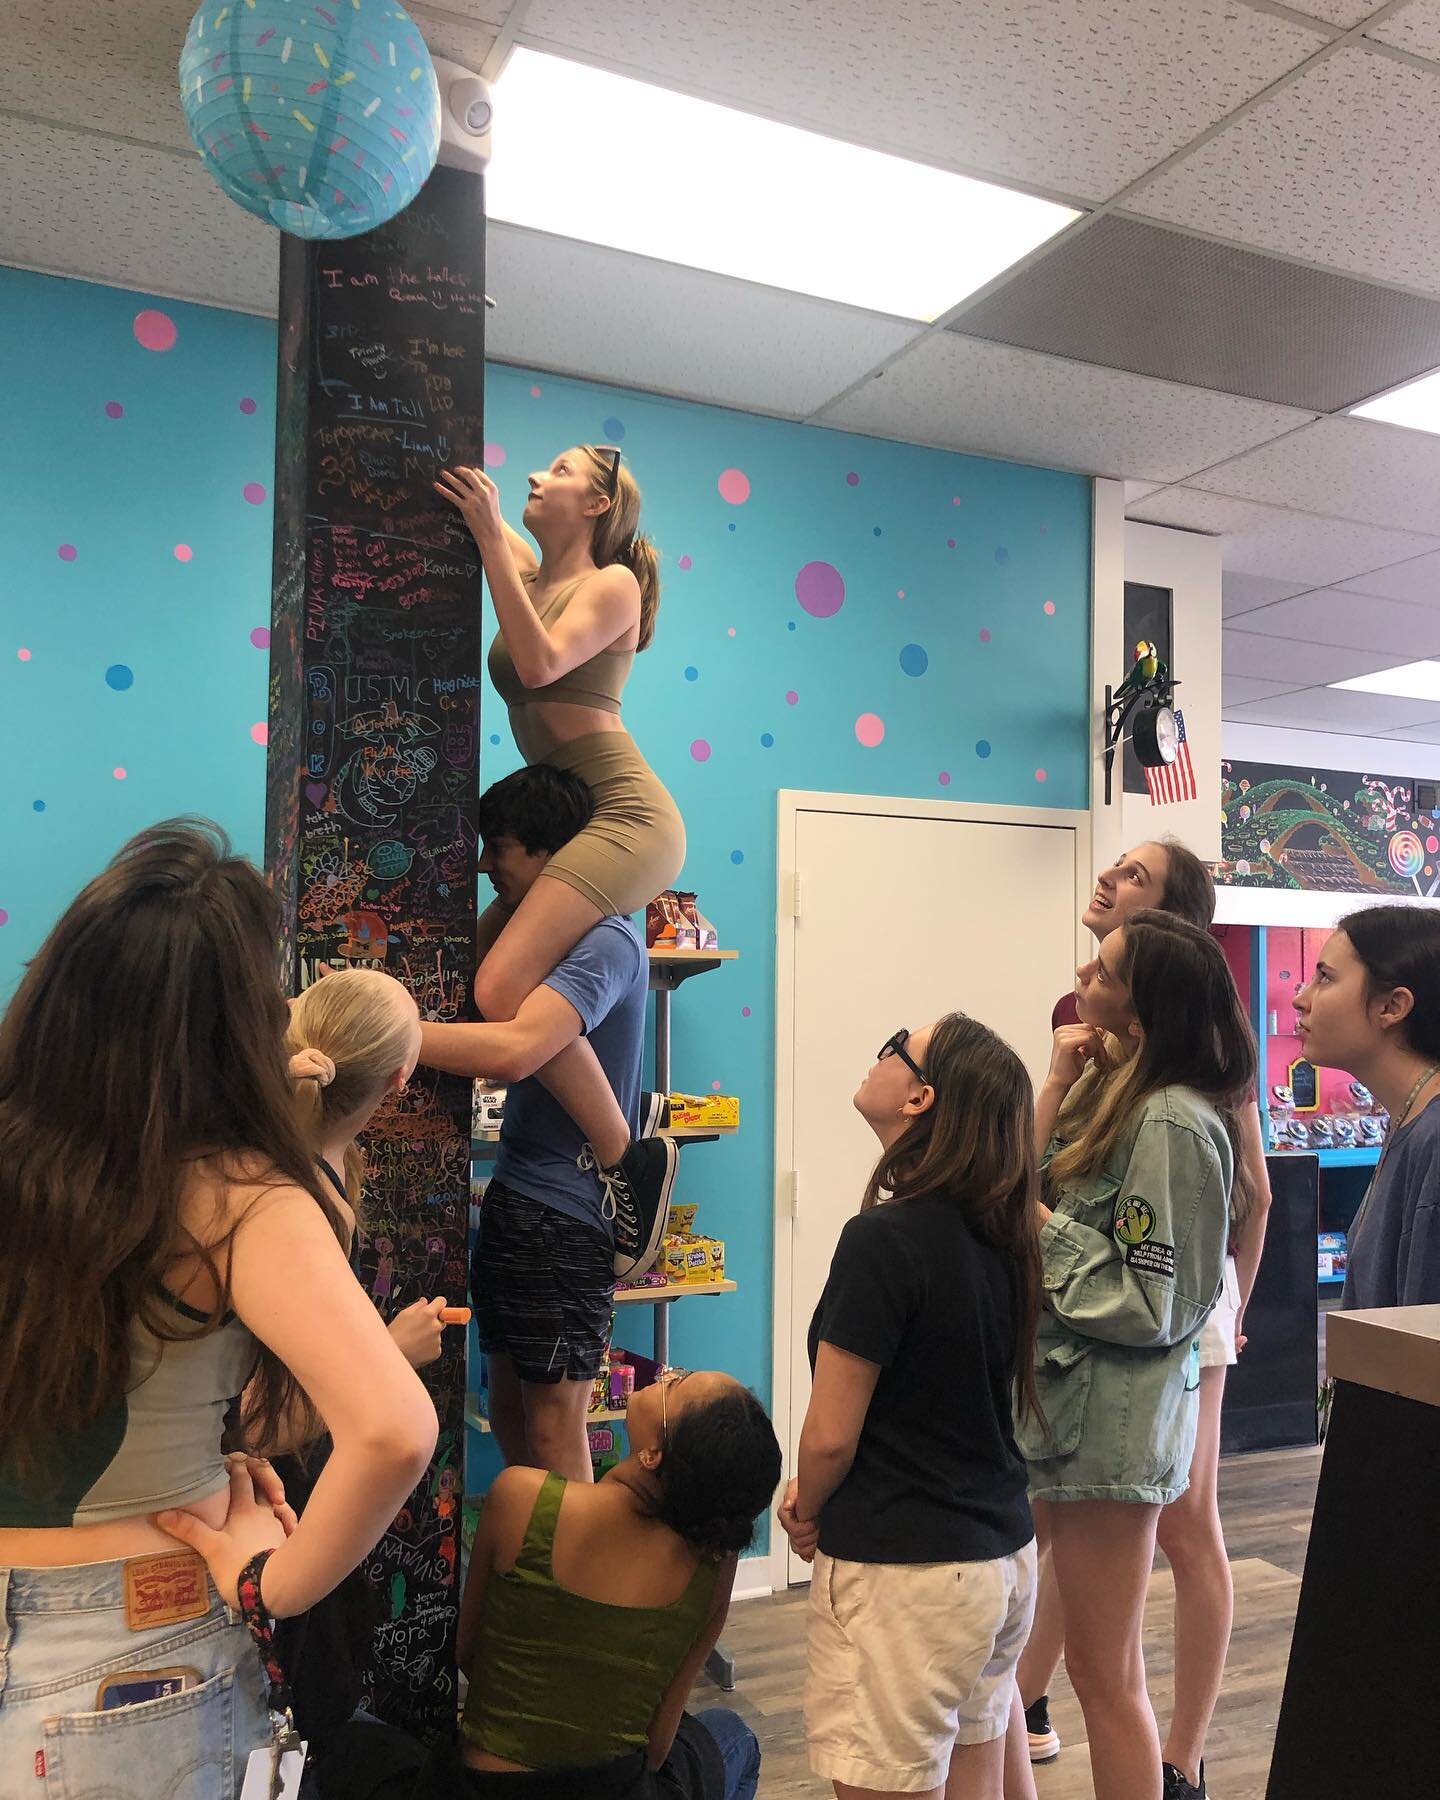 It&rsquo;s been a great year @thenutmegballet students! Always happy to welcome you back and always sad to say goodbye! You brighten our city and we wish you a very Happy Summer! #tilwemeetagain #candystore #fiestamarbleforever #shannanigans #writing